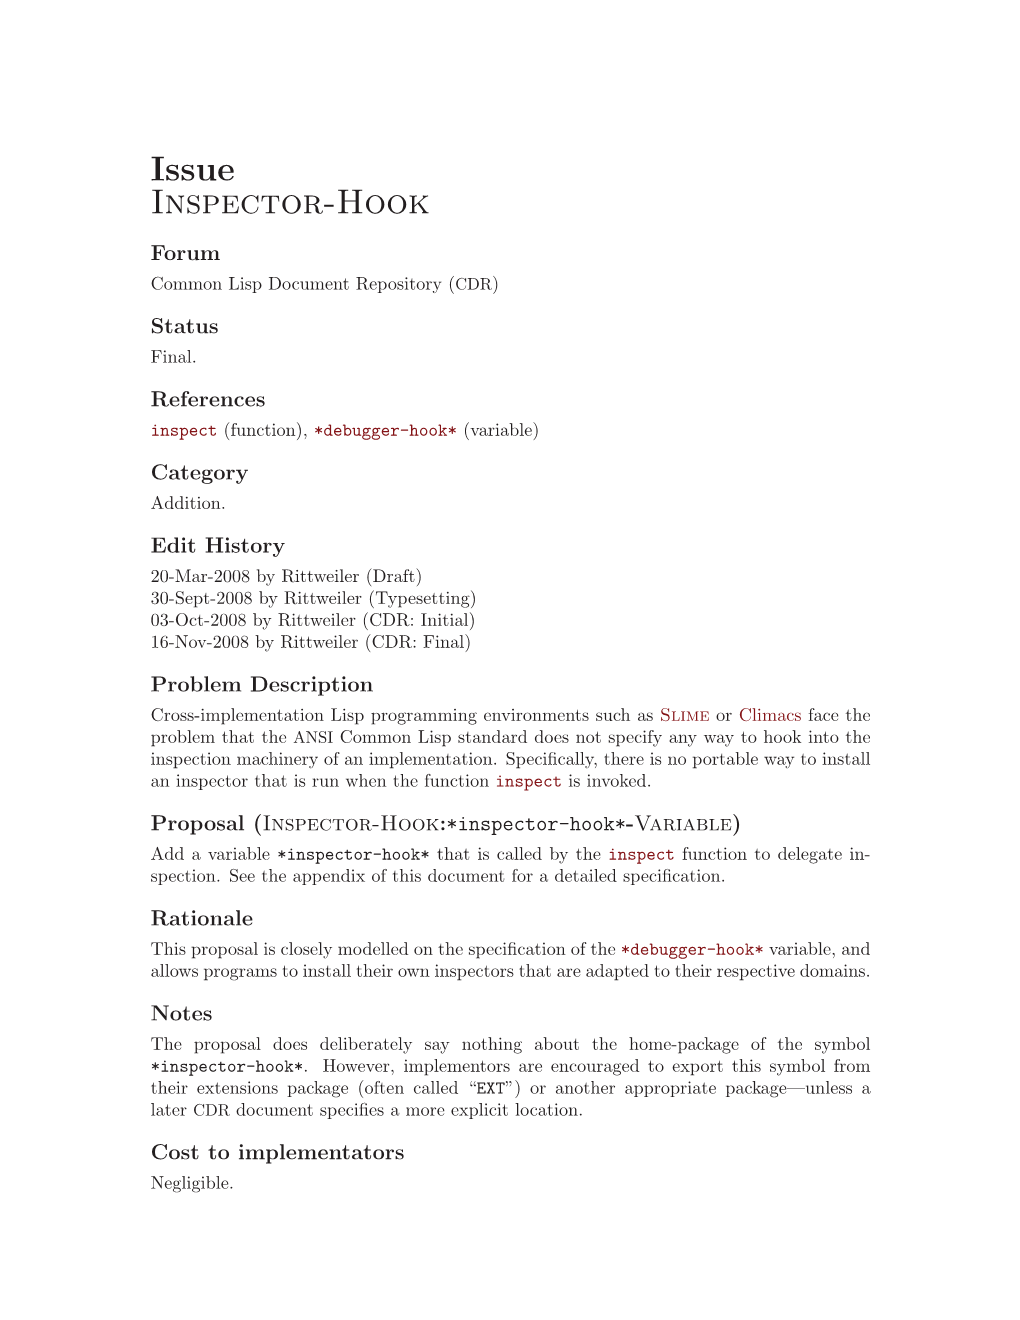 Issue Inspector-Hook Forum Common Lisp Document Repository (CDR)